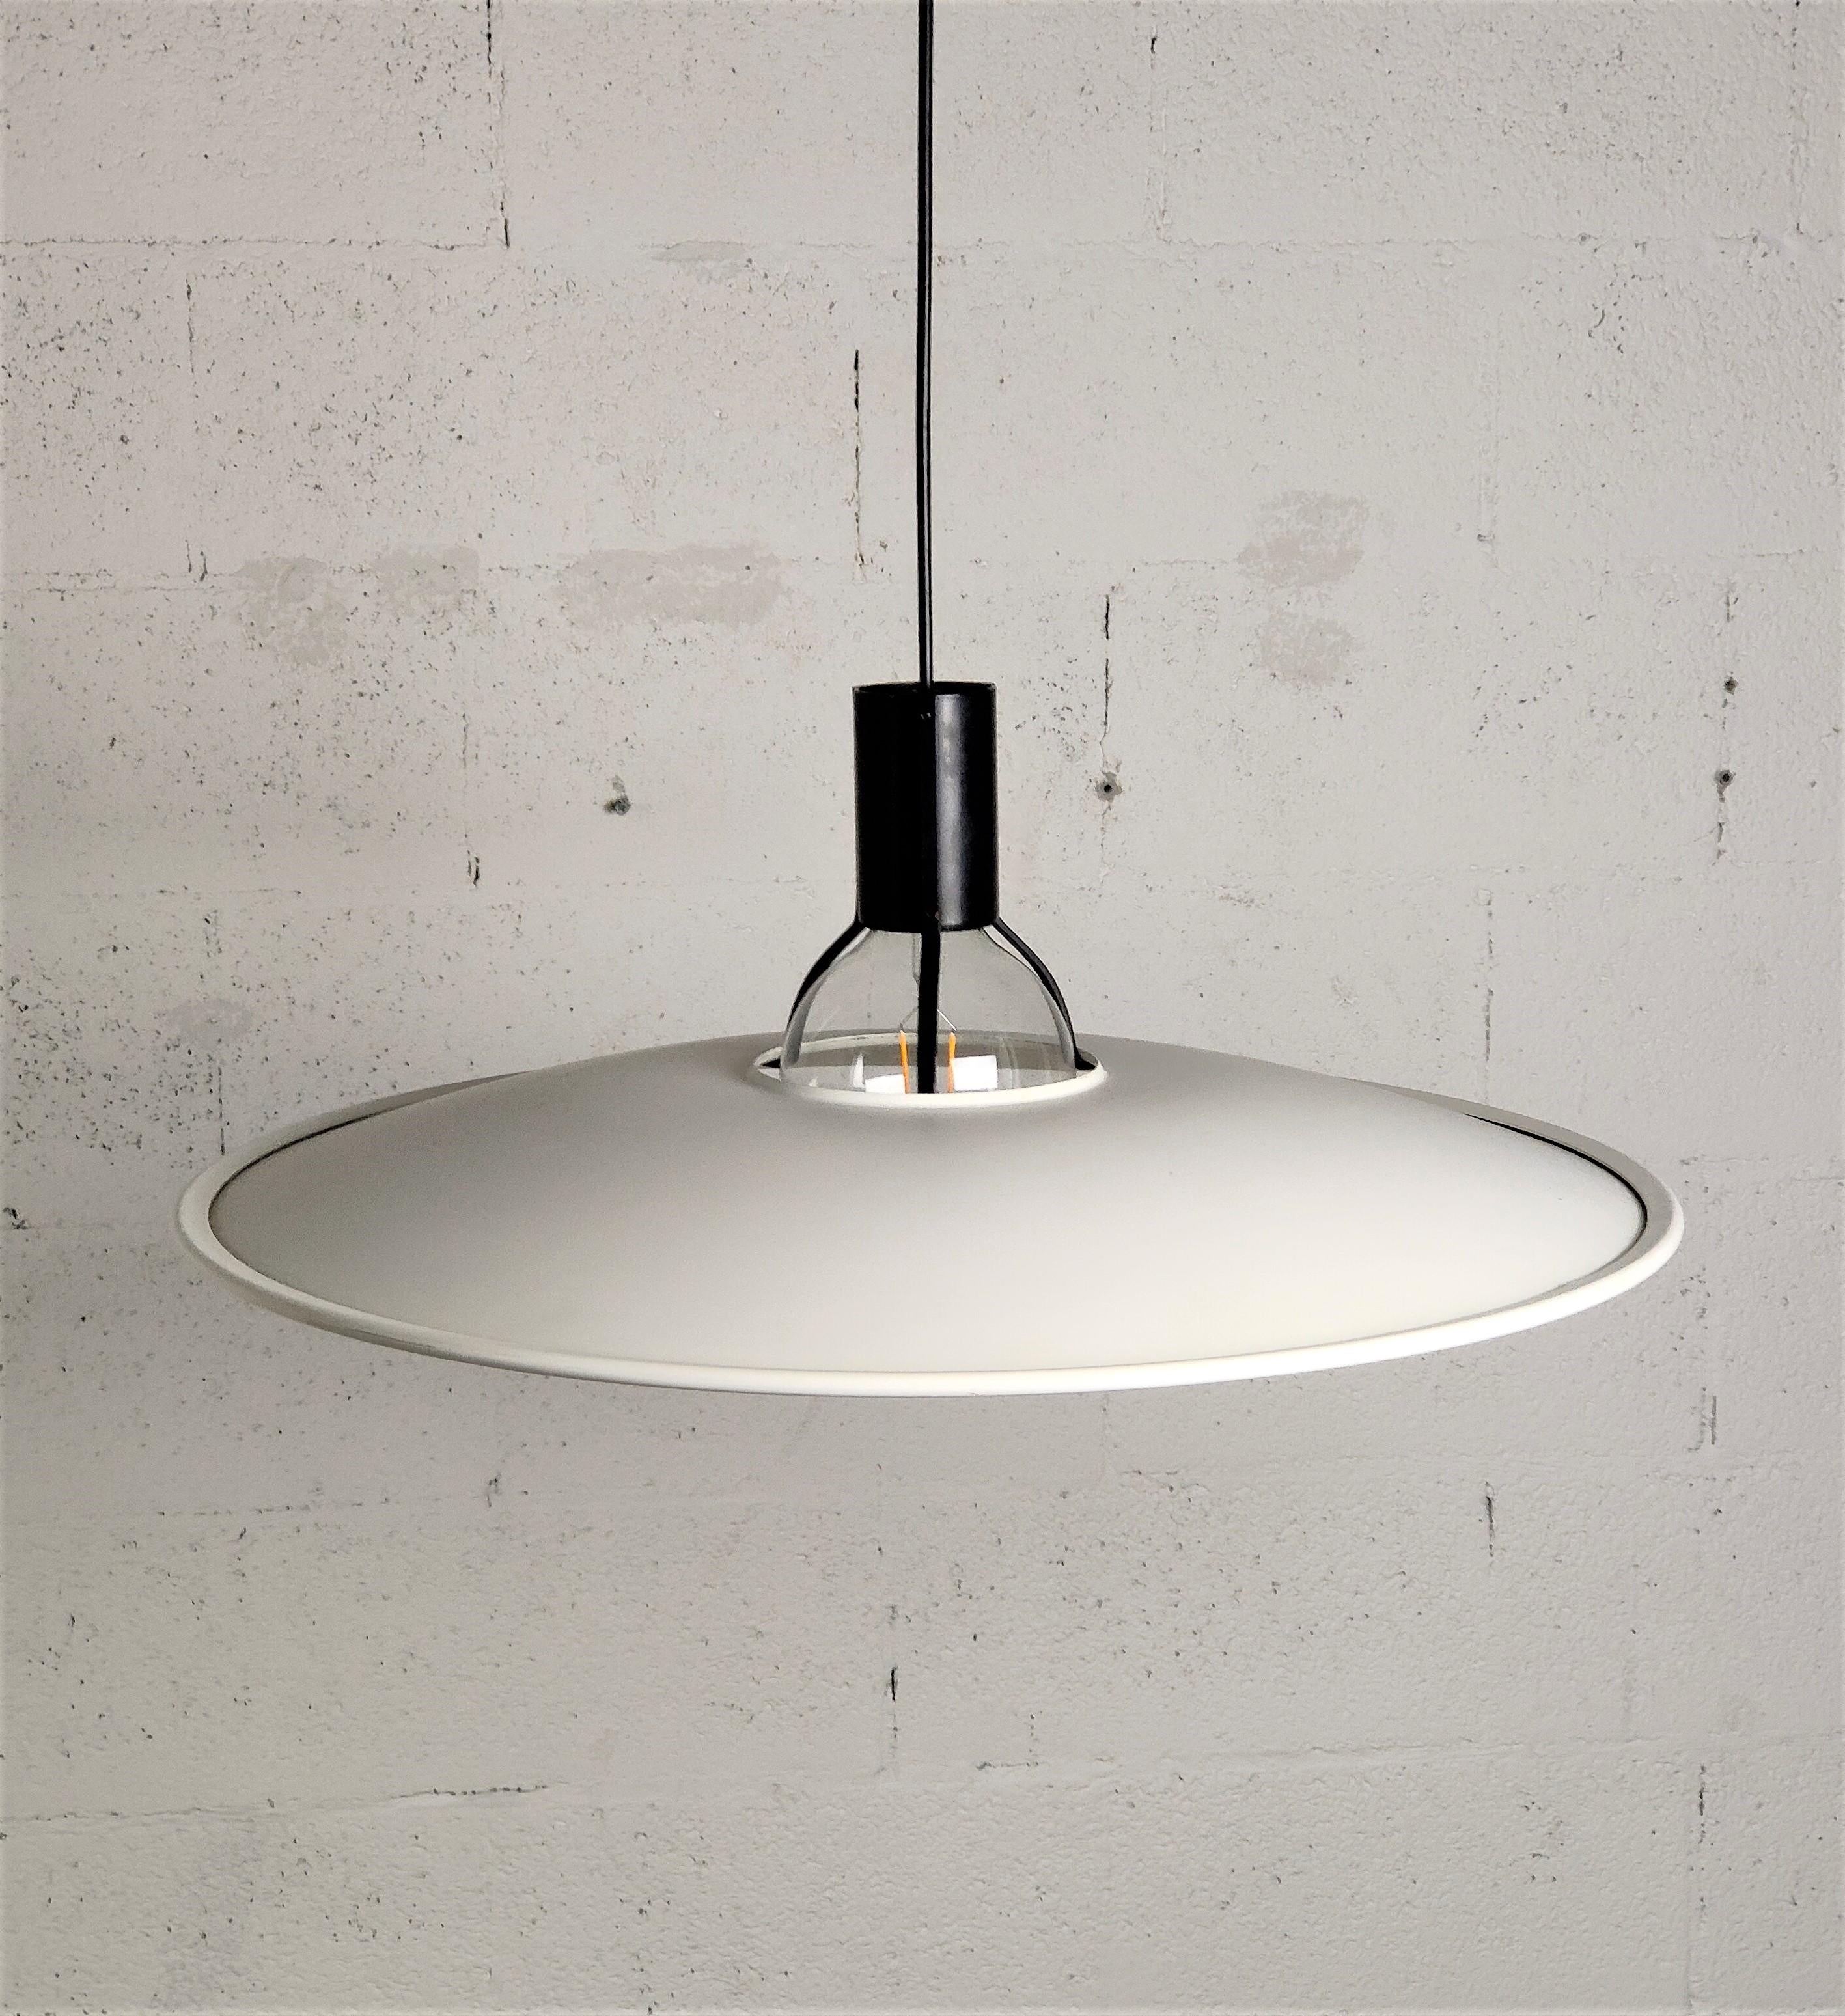 Metal chandelier pendant lamp 2133 model designed by Gino Sarfatti and manufactured by Arteluce Italy 1970s.
White metal lampshade with black metal lamp holder, where the lampshade stays on. Mark present in the upper part. E27 connection.
Good